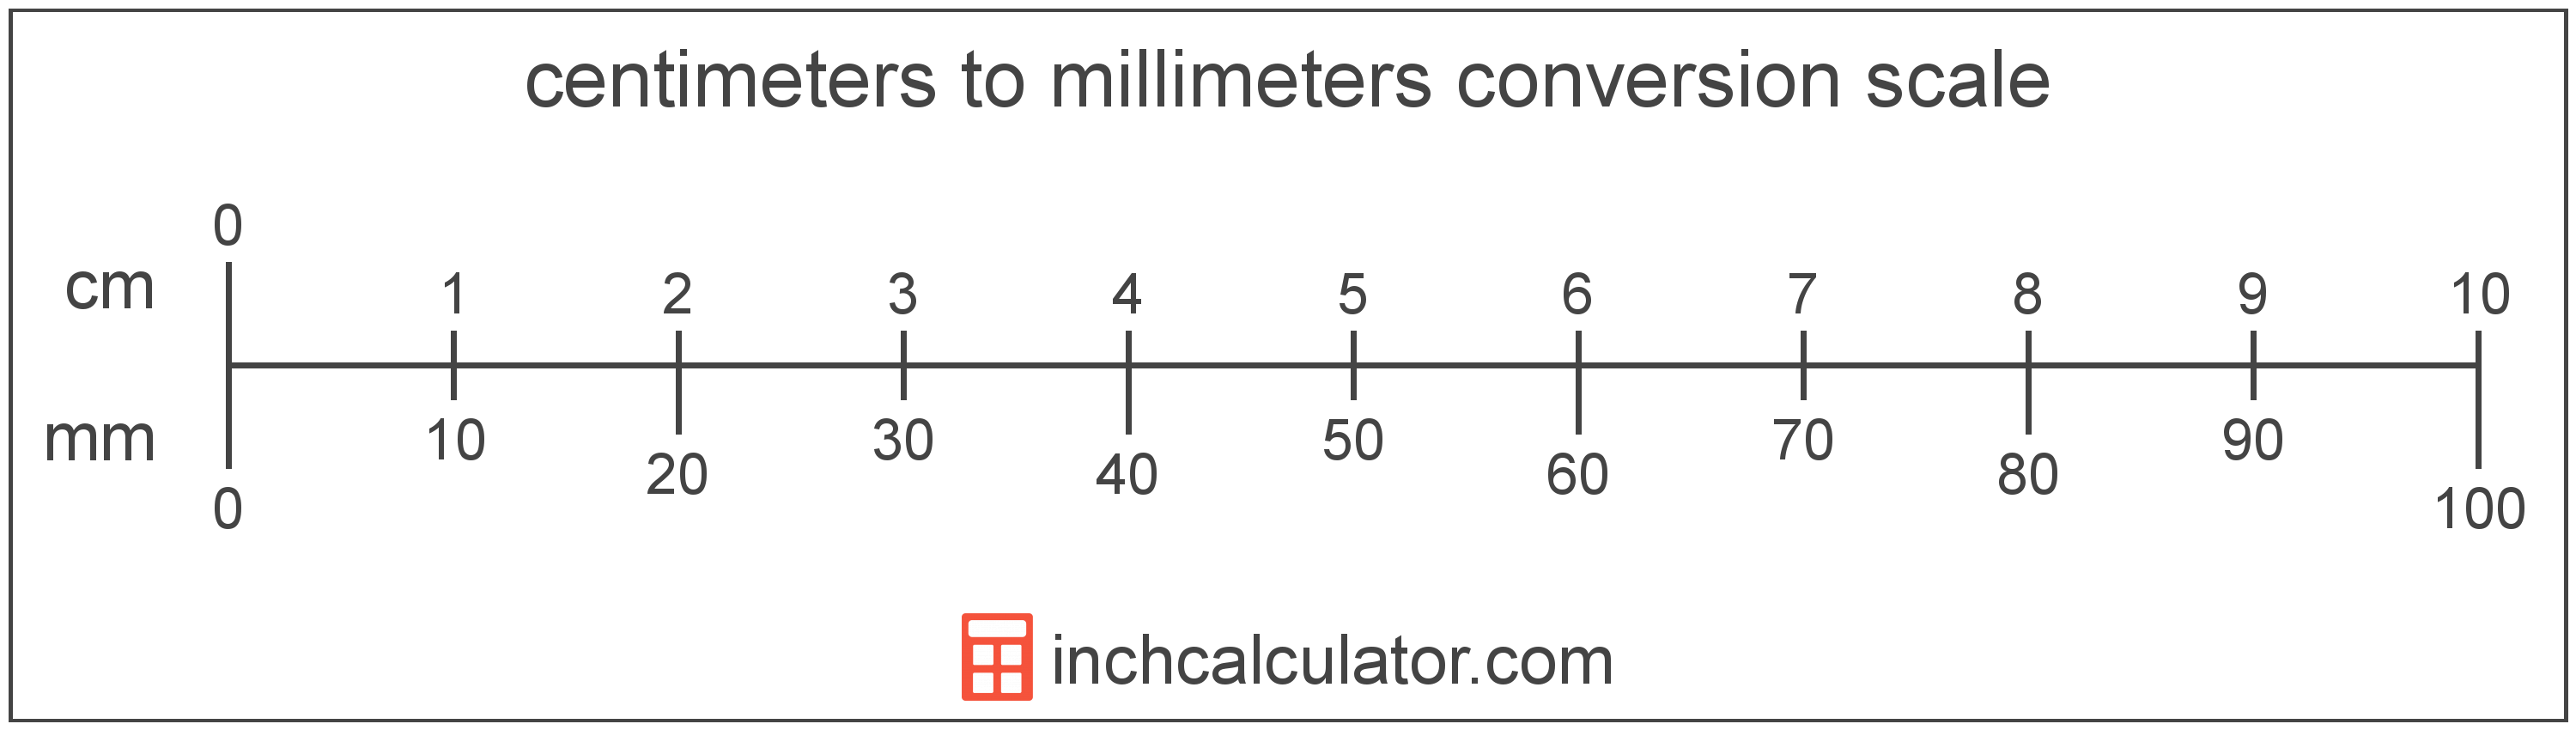 conversion scale showing centimeters and equivalent millimeters length values